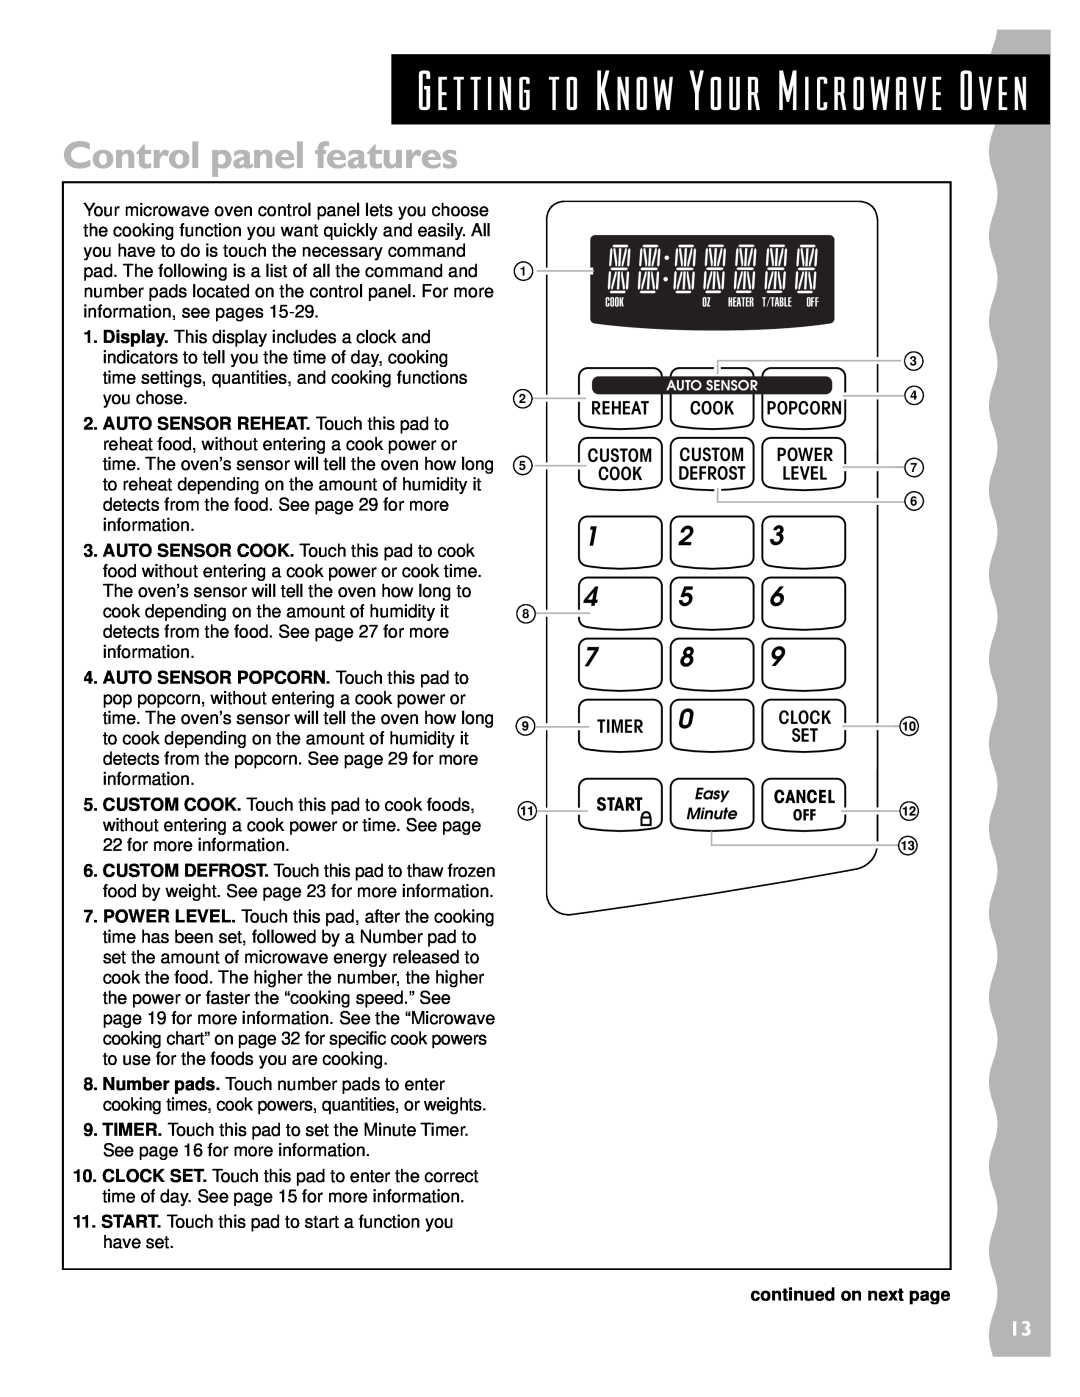 KitchenAid KCMS135H installation instructions Control panel features, Timer, START Easy CANCEL, 1 2 4 5 7 8 